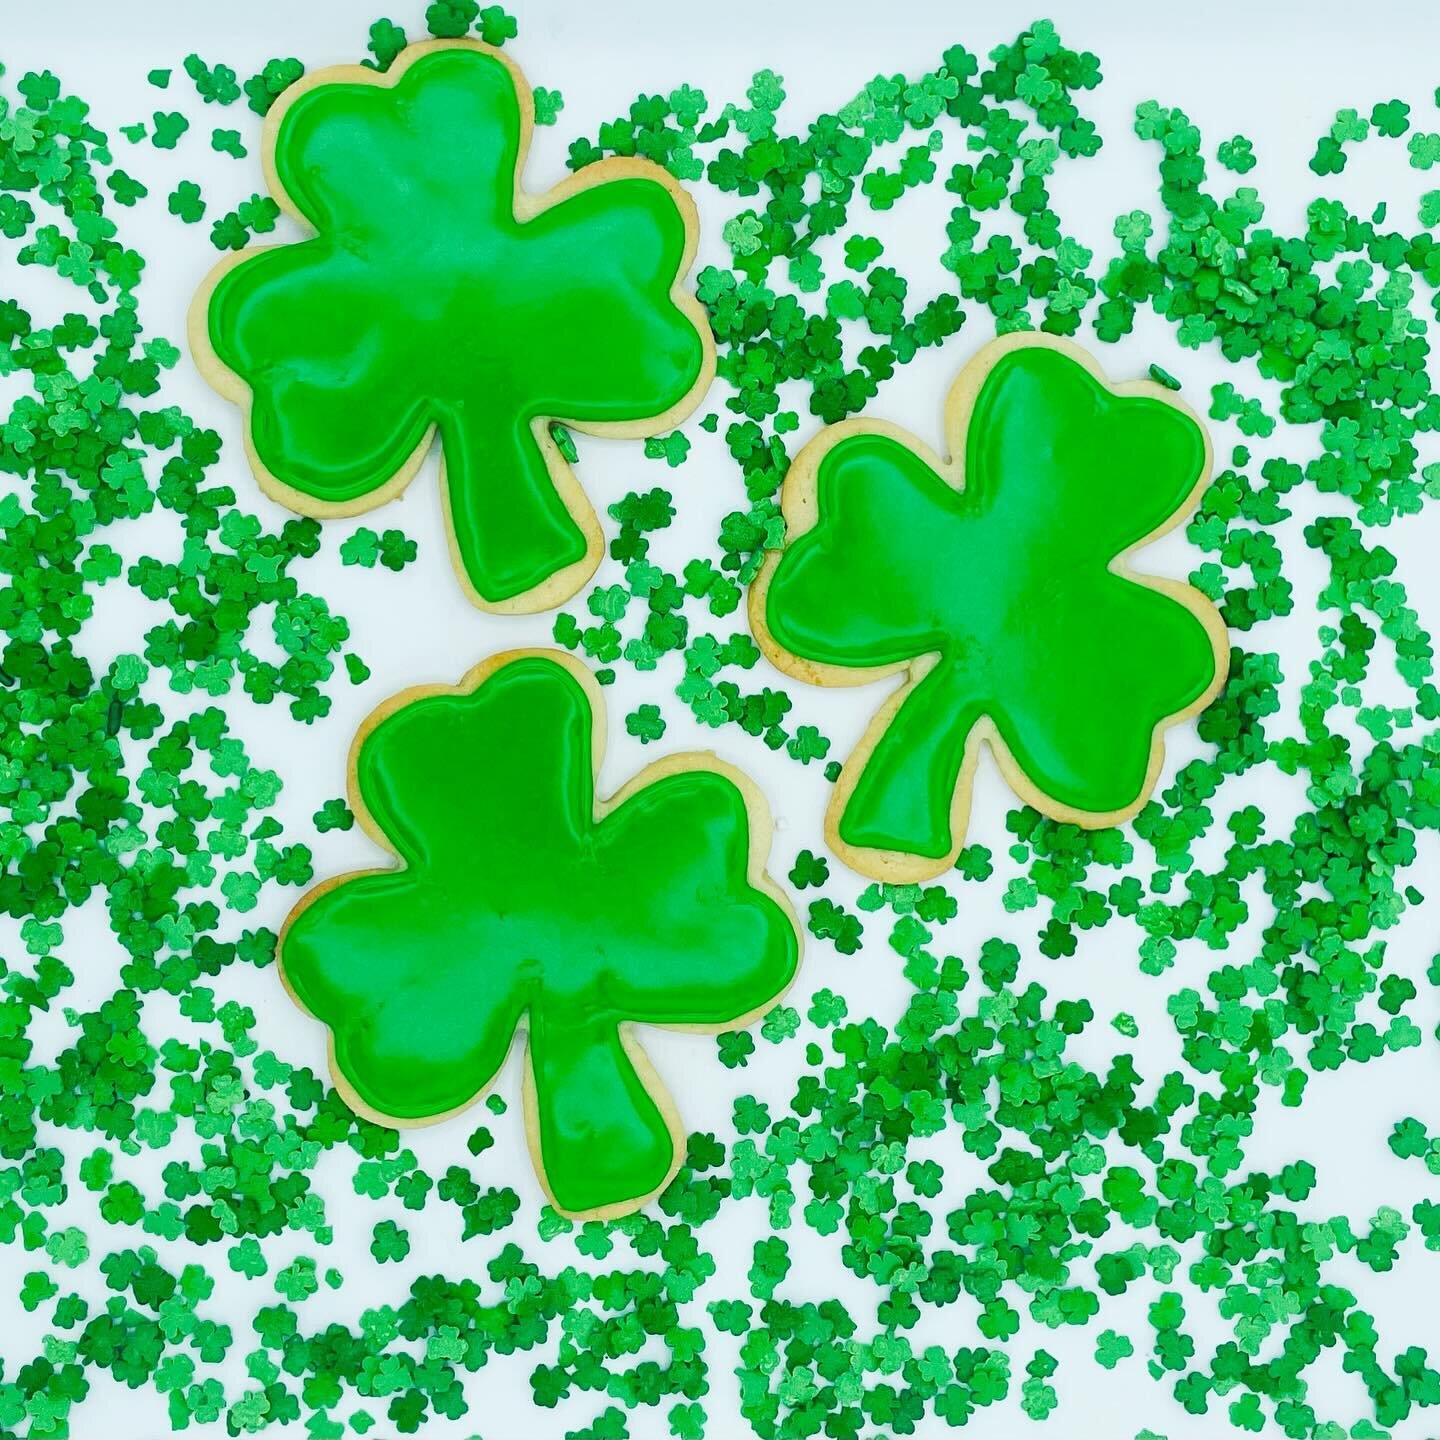 Our St Patrick&rsquo;s Day treats are sure to make your little leprechauns feel like they&rsquo;ve hit GOLD! Stop in to pick up some tasty treats before the big day - we&rsquo;re sure they&rsquo;ll make you the shining shamrock of your household 🌟🍀